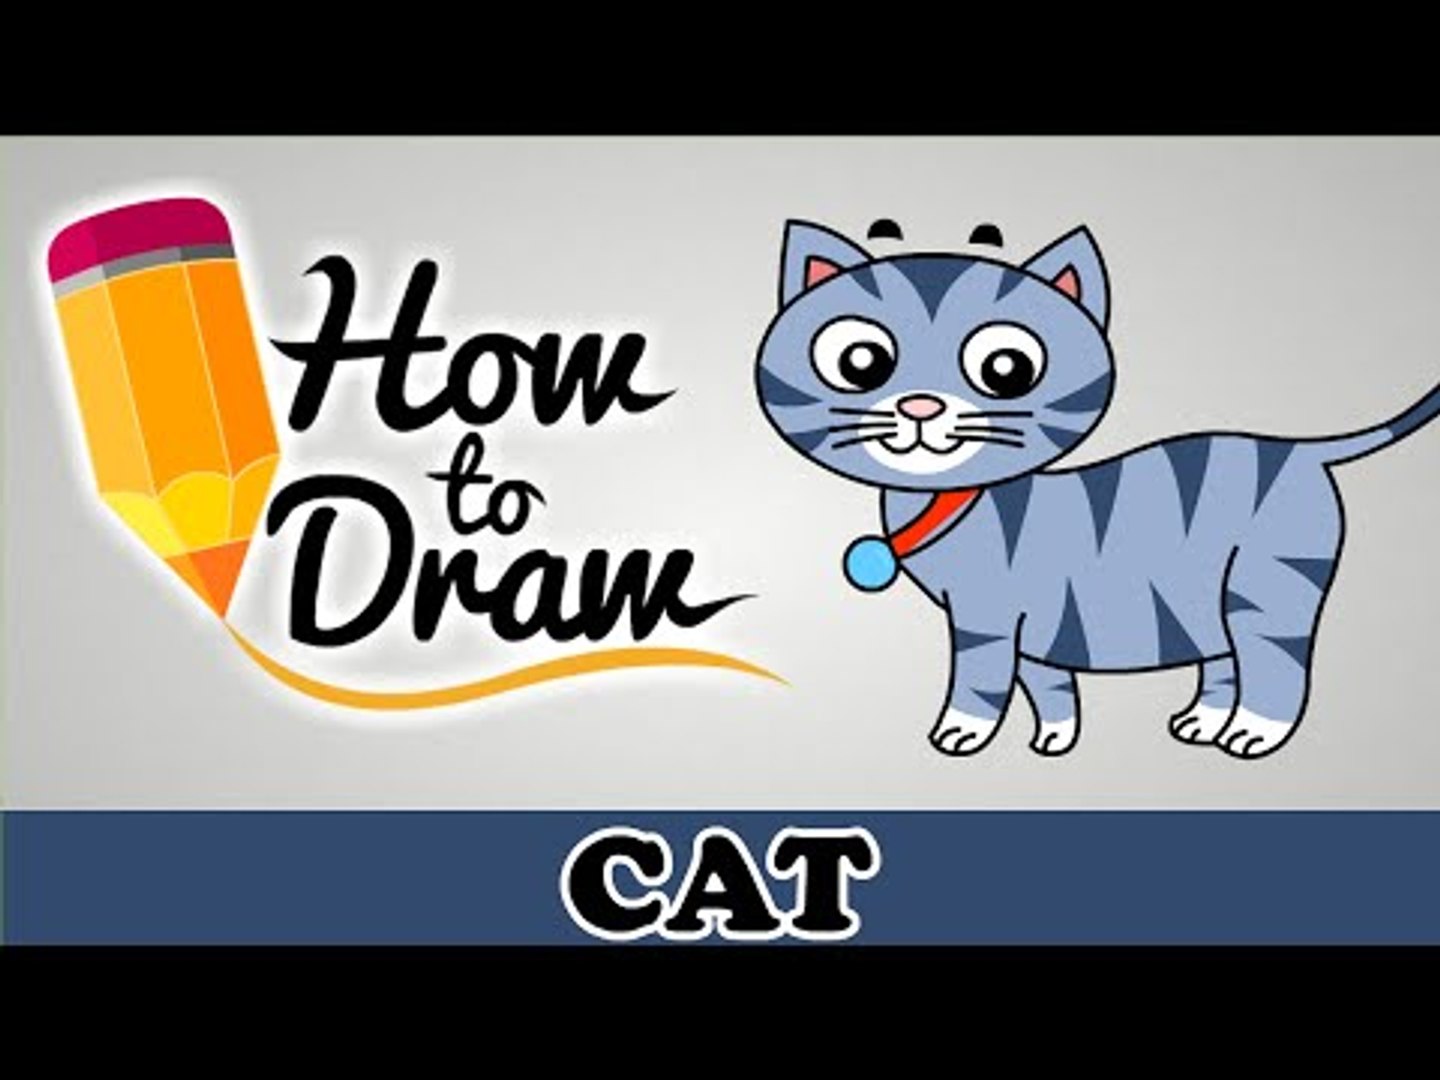 Easy Cat Drawing Ideas » How to draw a Cat Step by Step